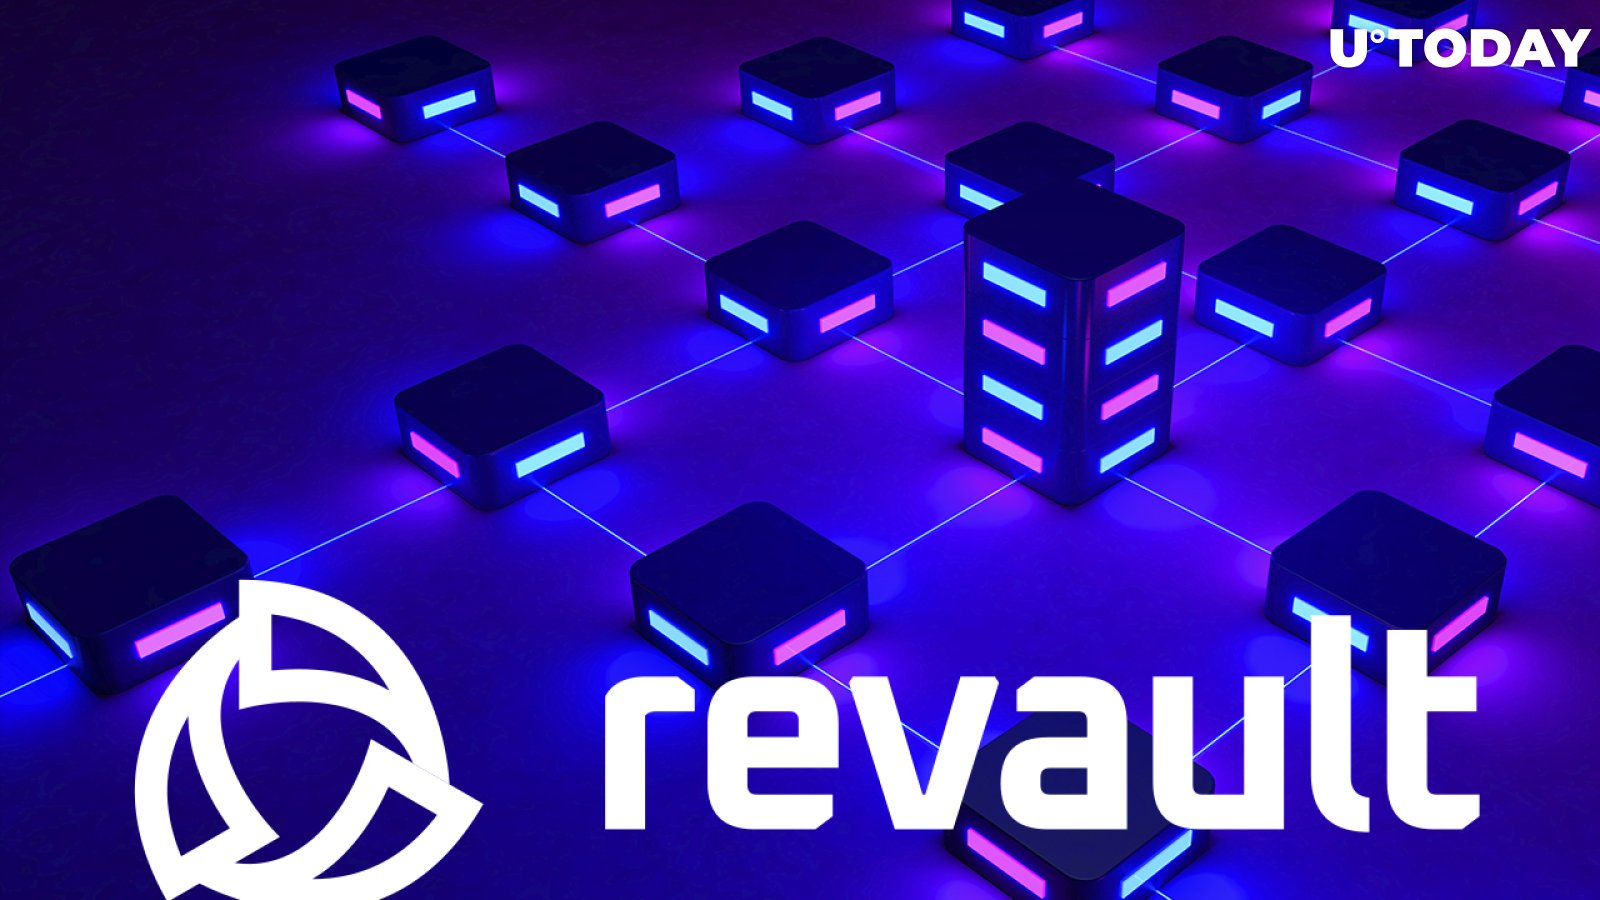 Revault Network to Start Using Orbs Layer 3 to Empower Auto-Compound, TVL-APR Calculation and Auto-Rebalance